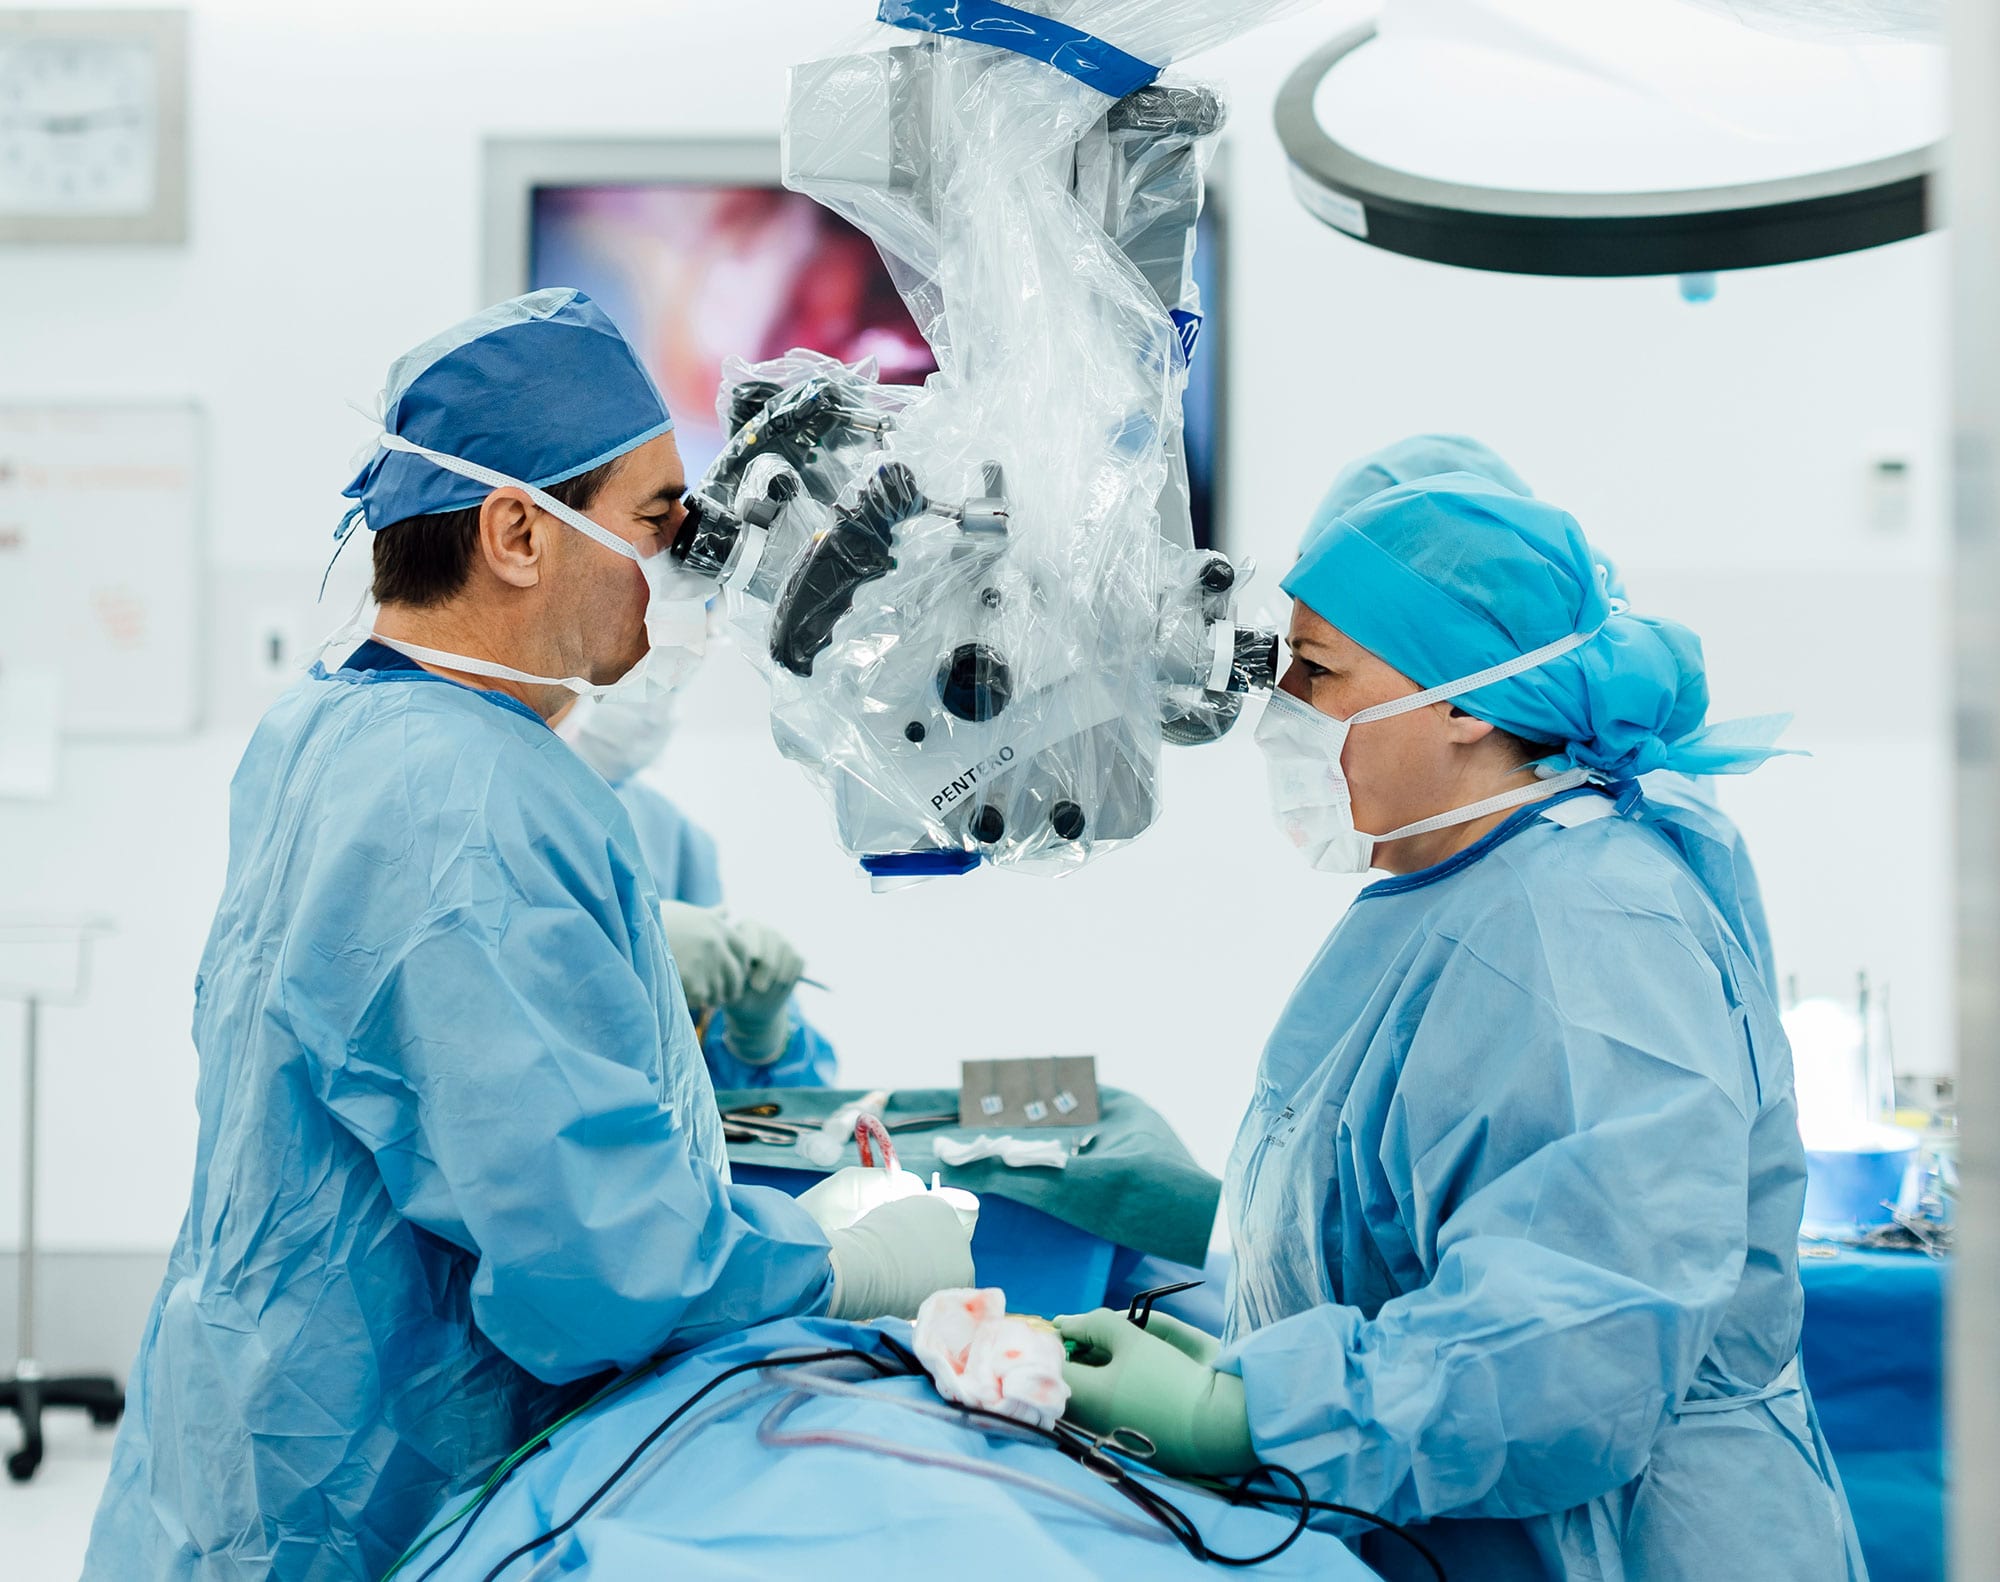 Bringing 4k To The OR: Working With The Zeiss TIVATO 700